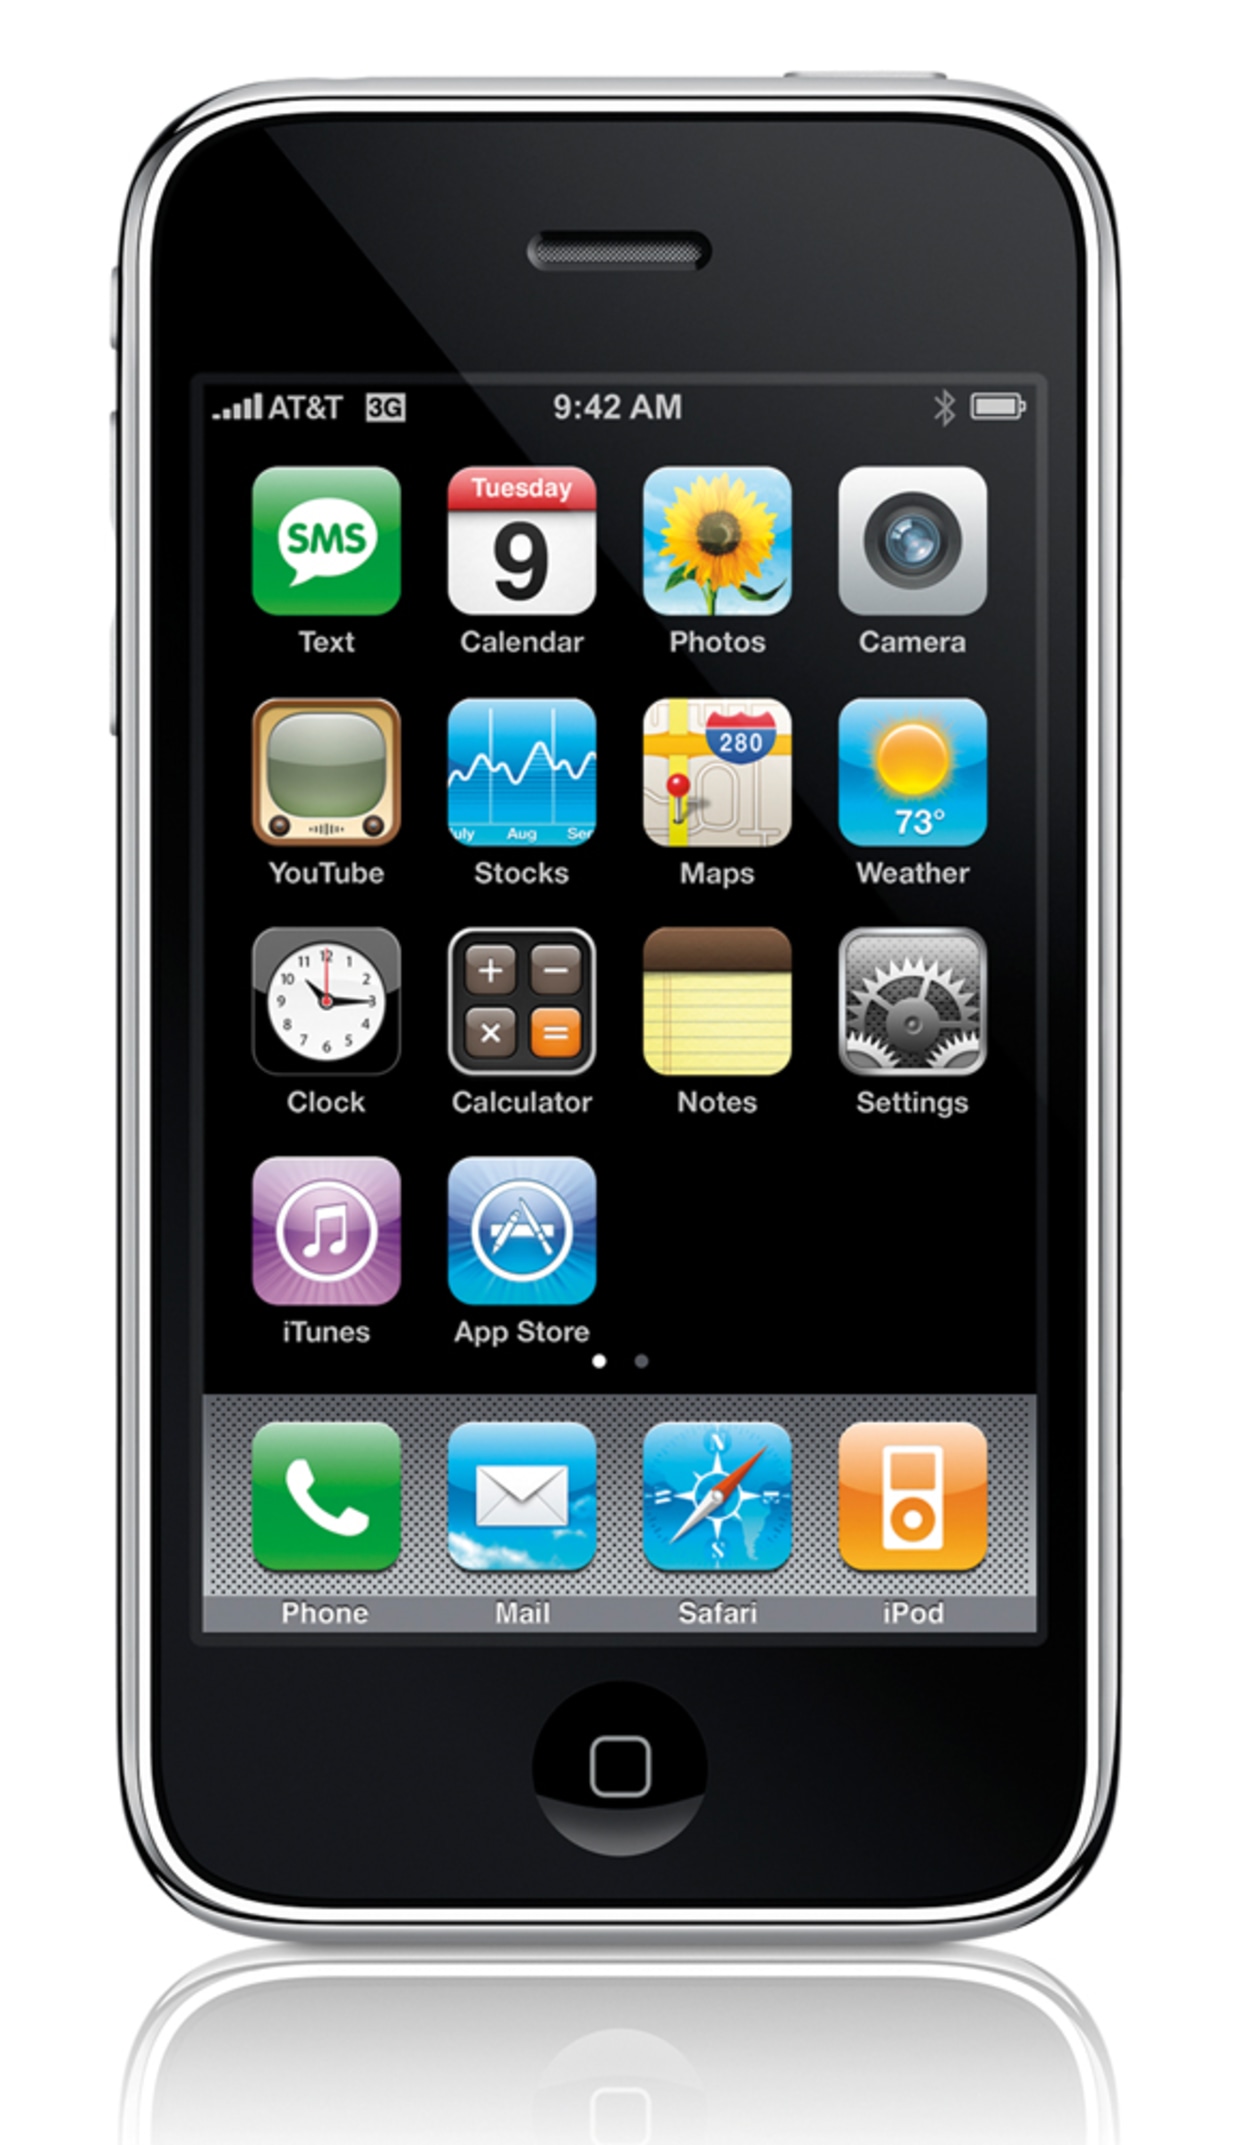 Analysts put a price on iPhone 3G